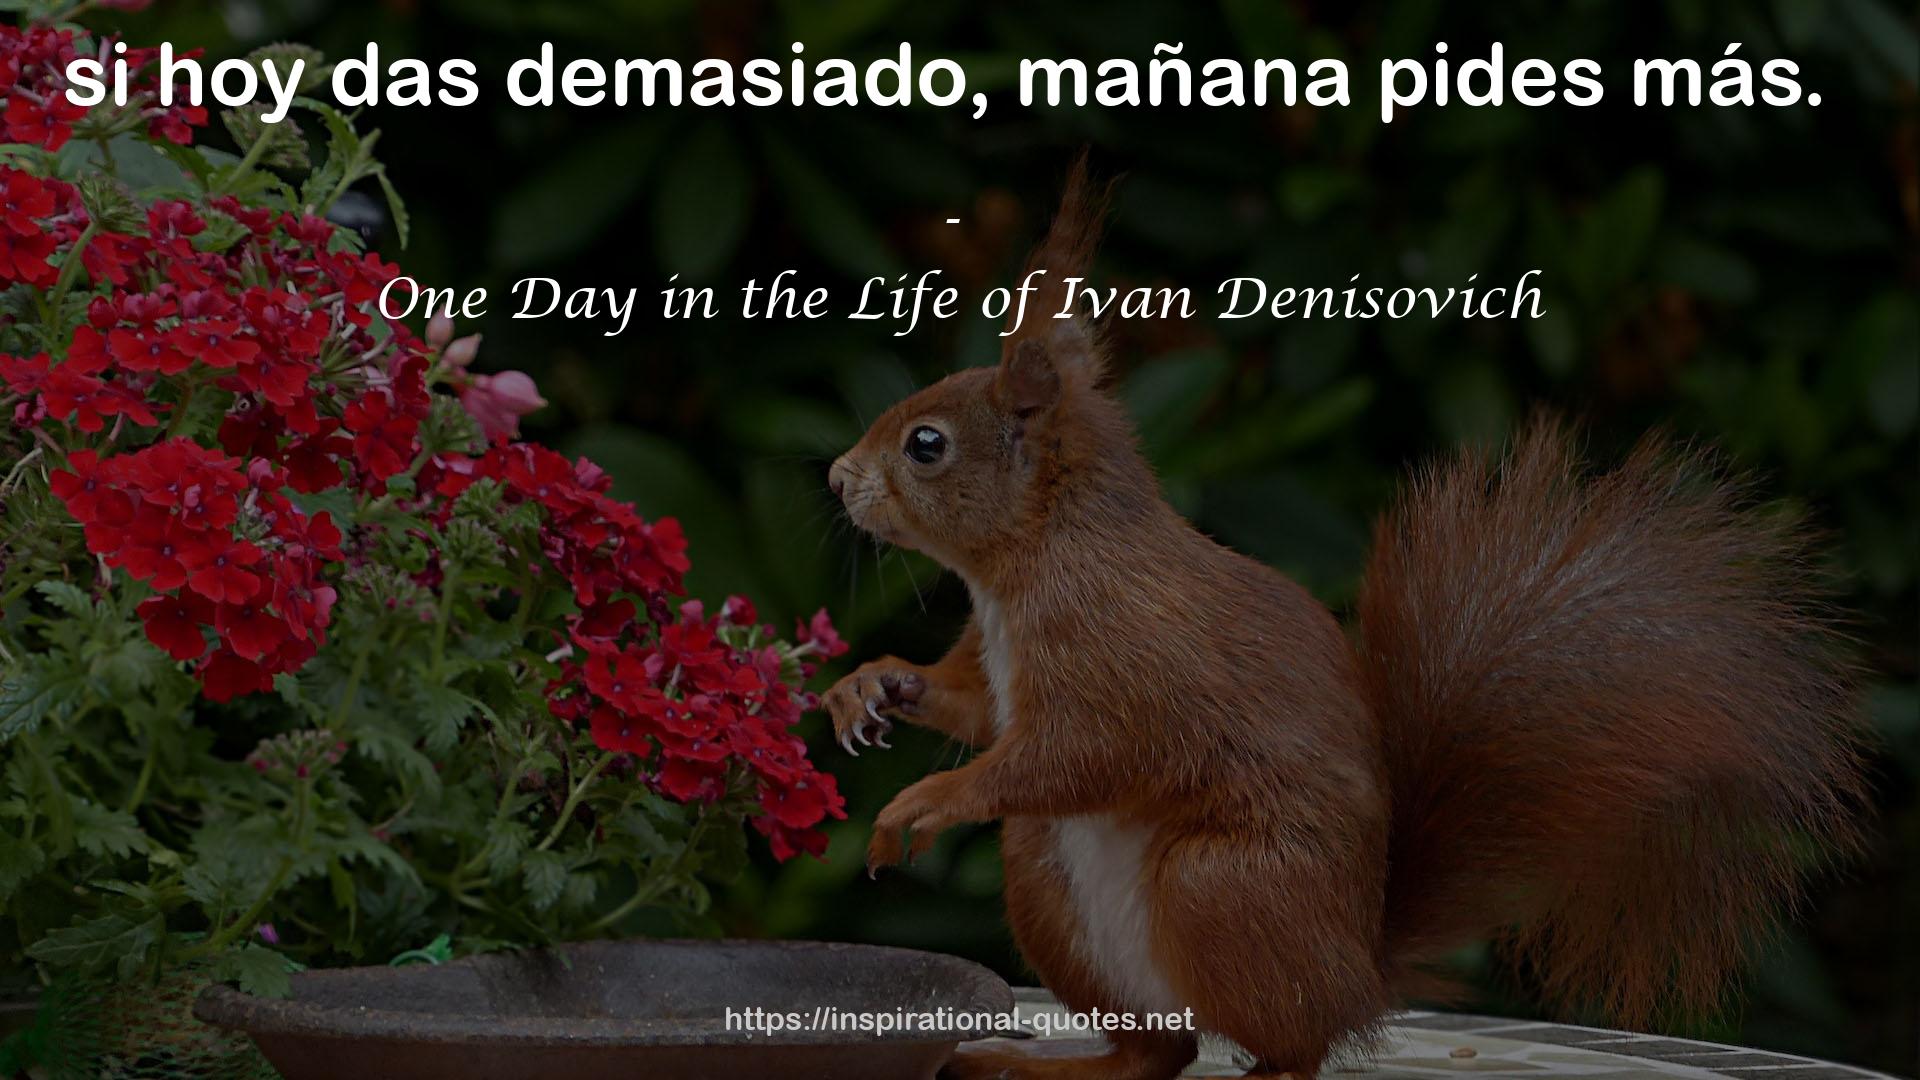 One Day in the Life of Ivan Denisovich QUOTES